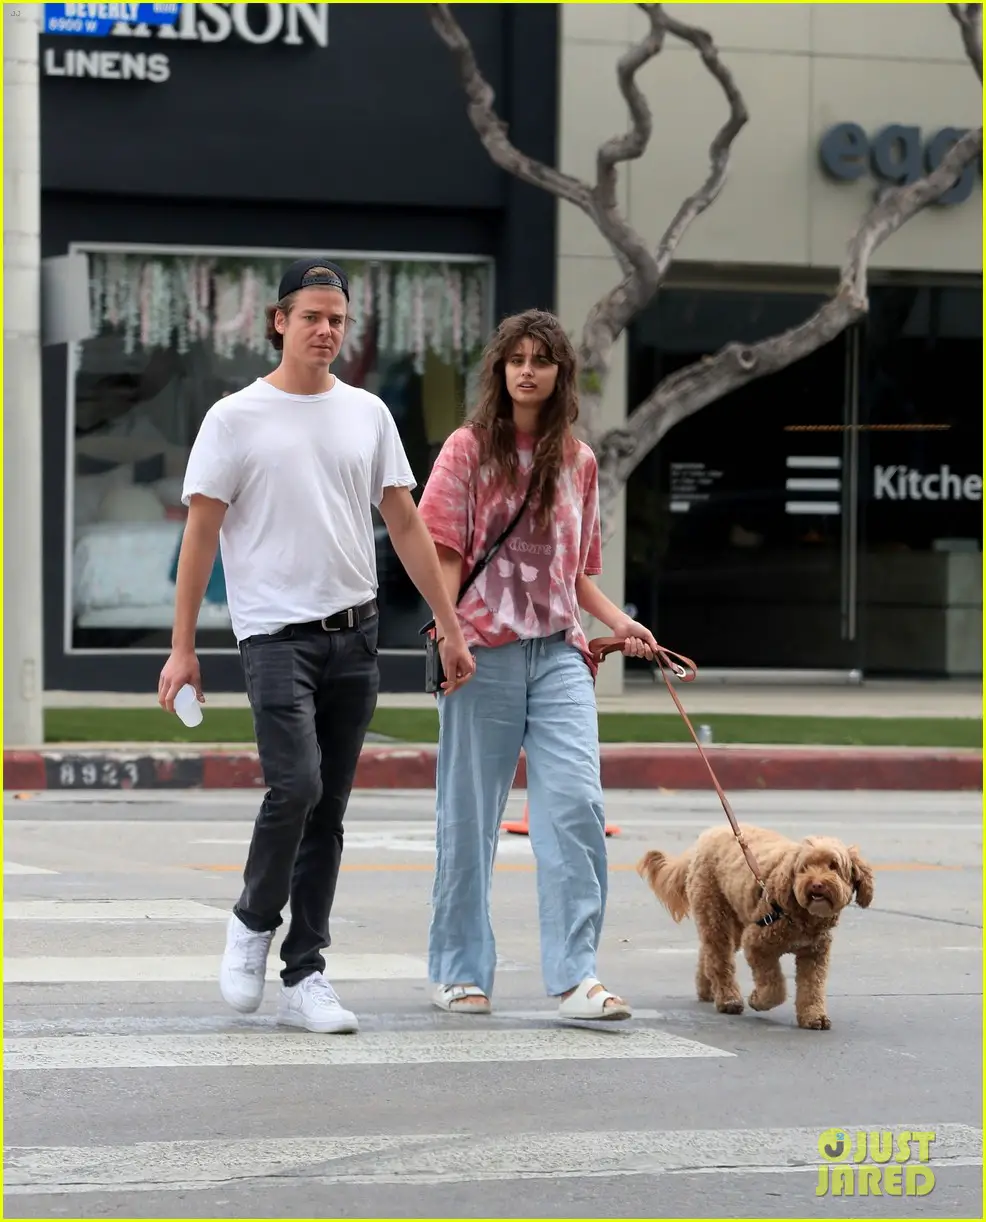 Daniel-Fryer-spotted-with-Taylor-Hill